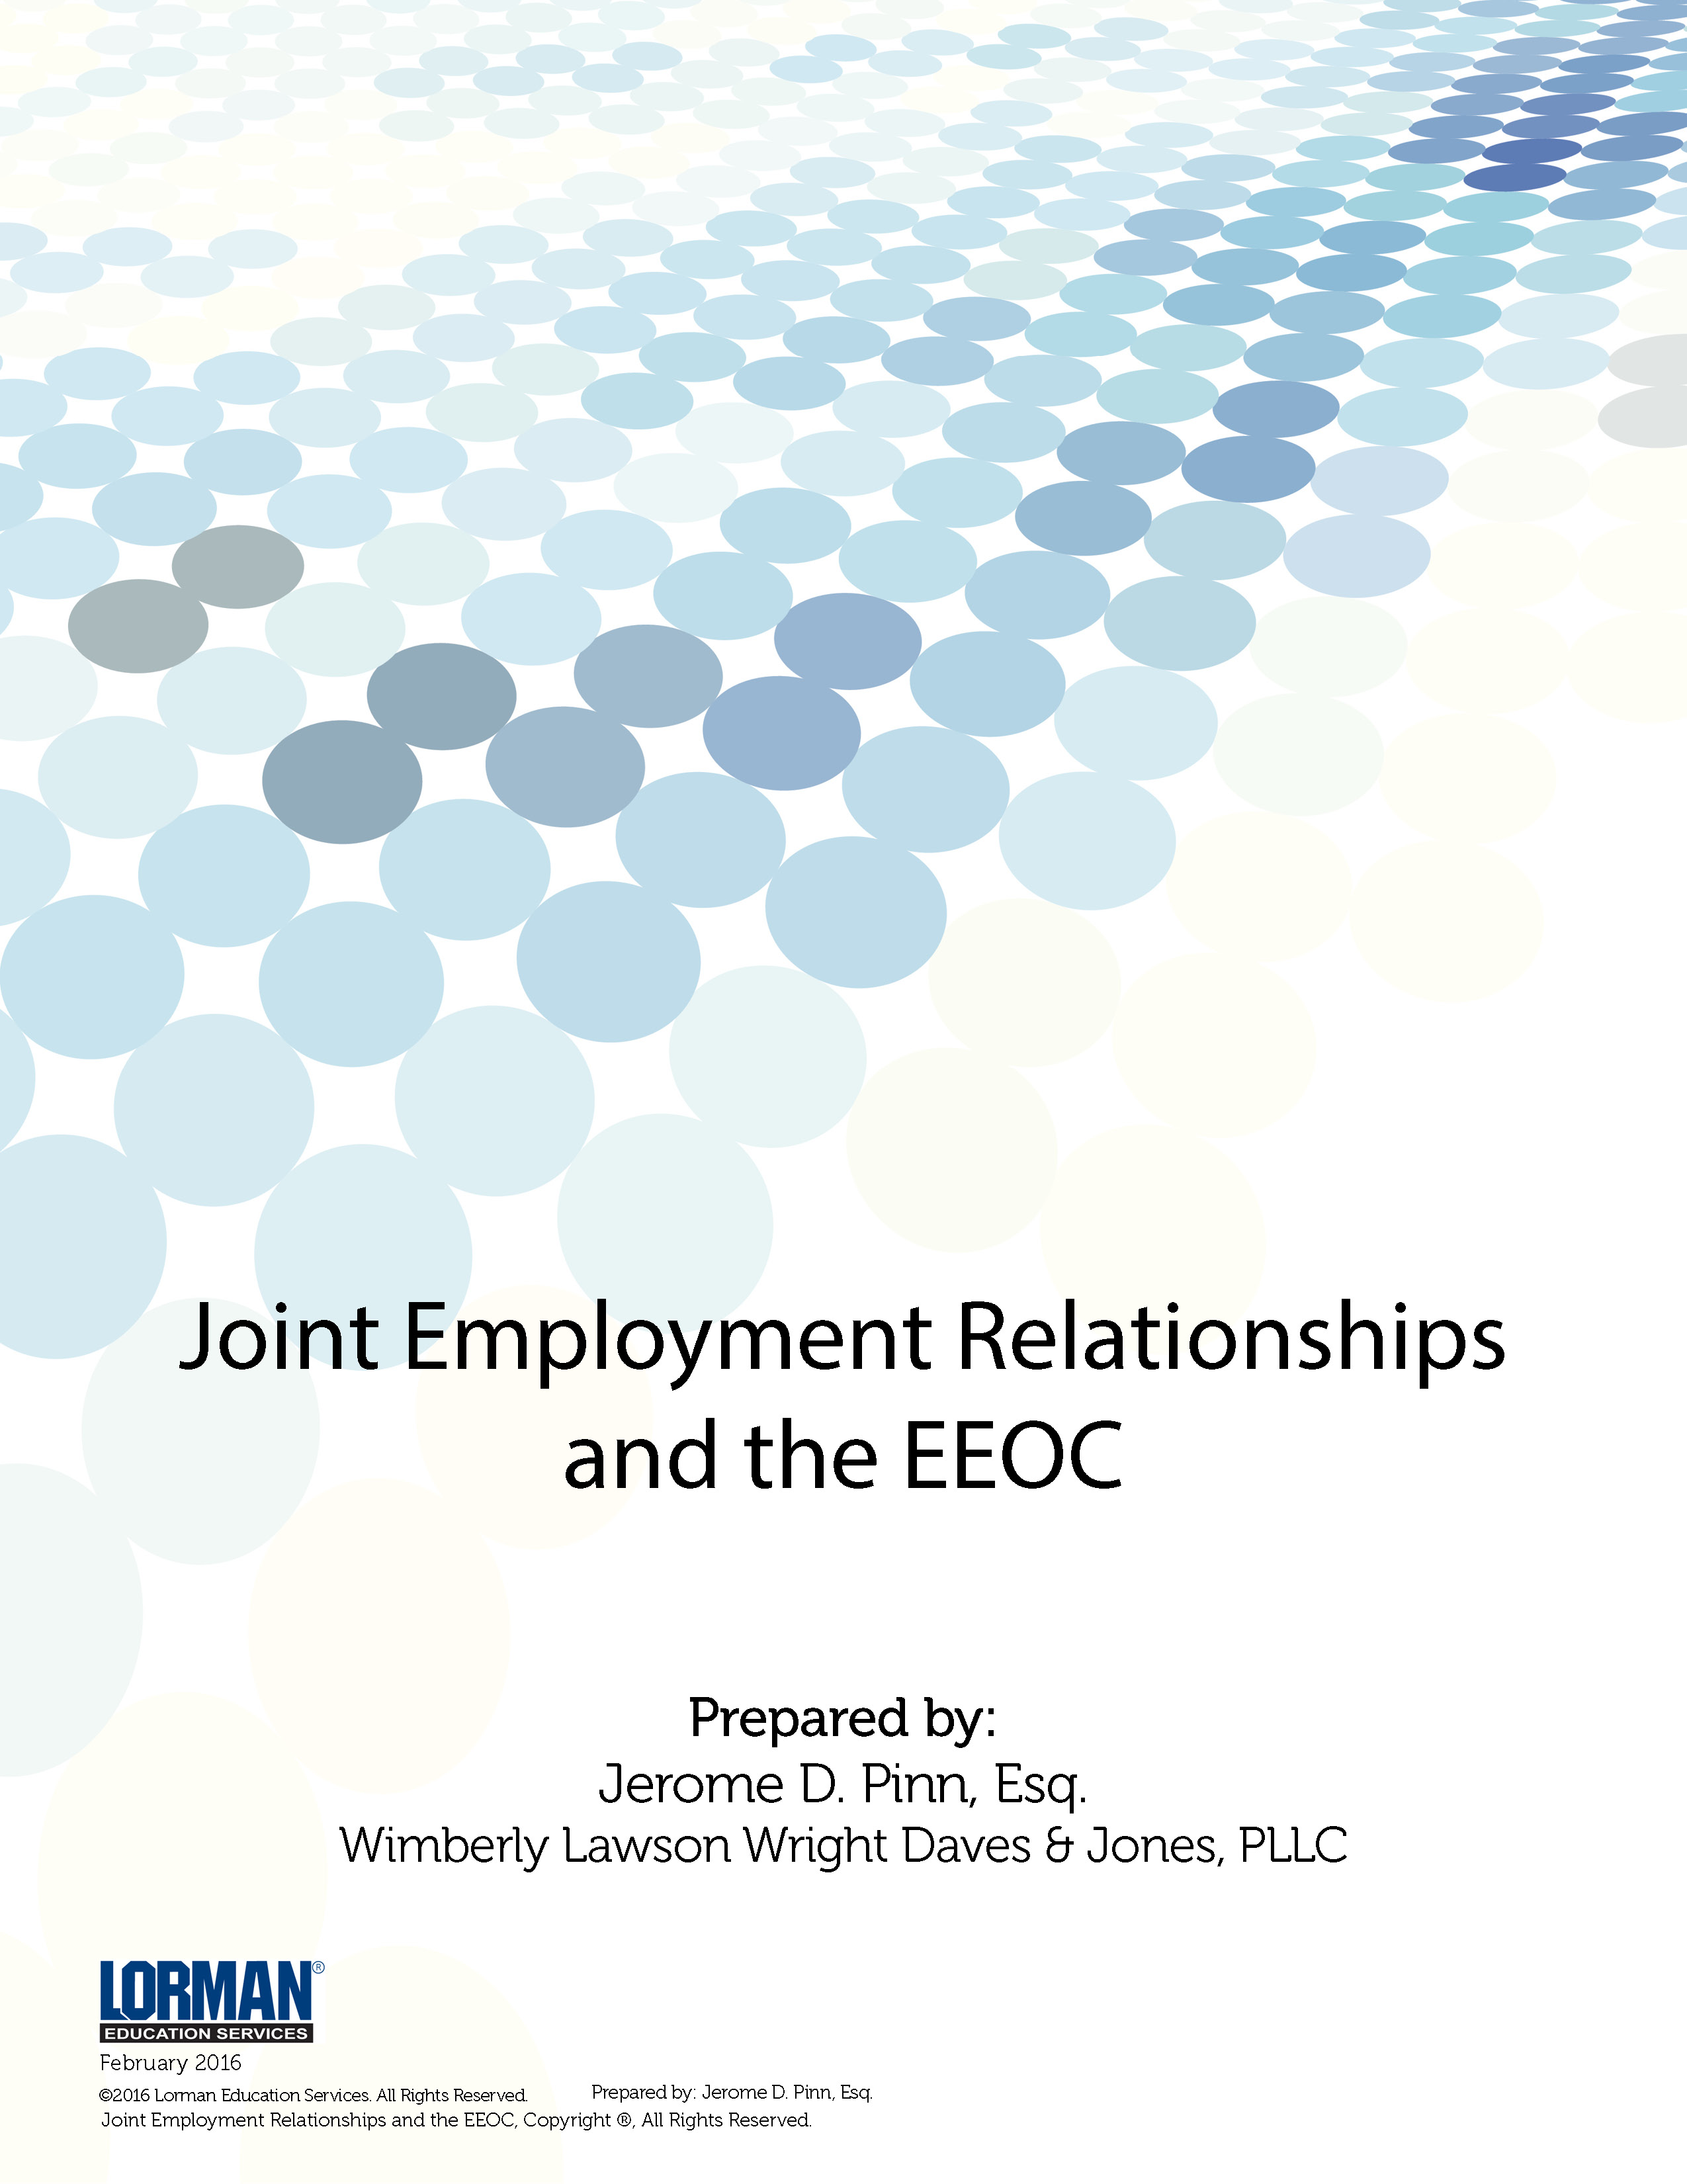 Joint Employment Relationships and the EEOC